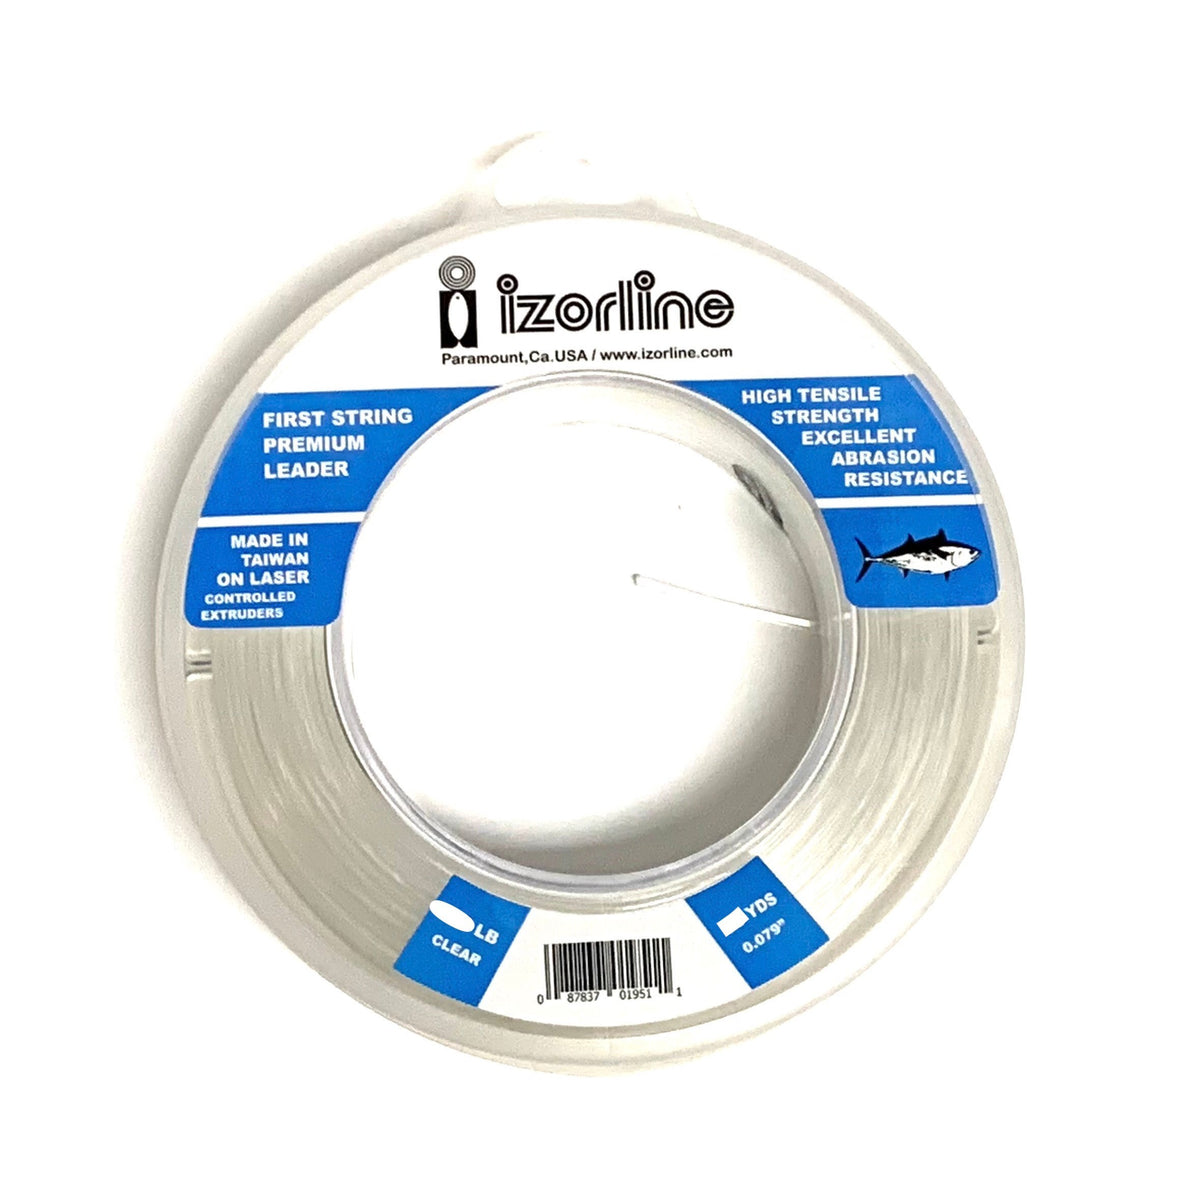 Izorline First String Clear Monofilament Wind-On Top Shots